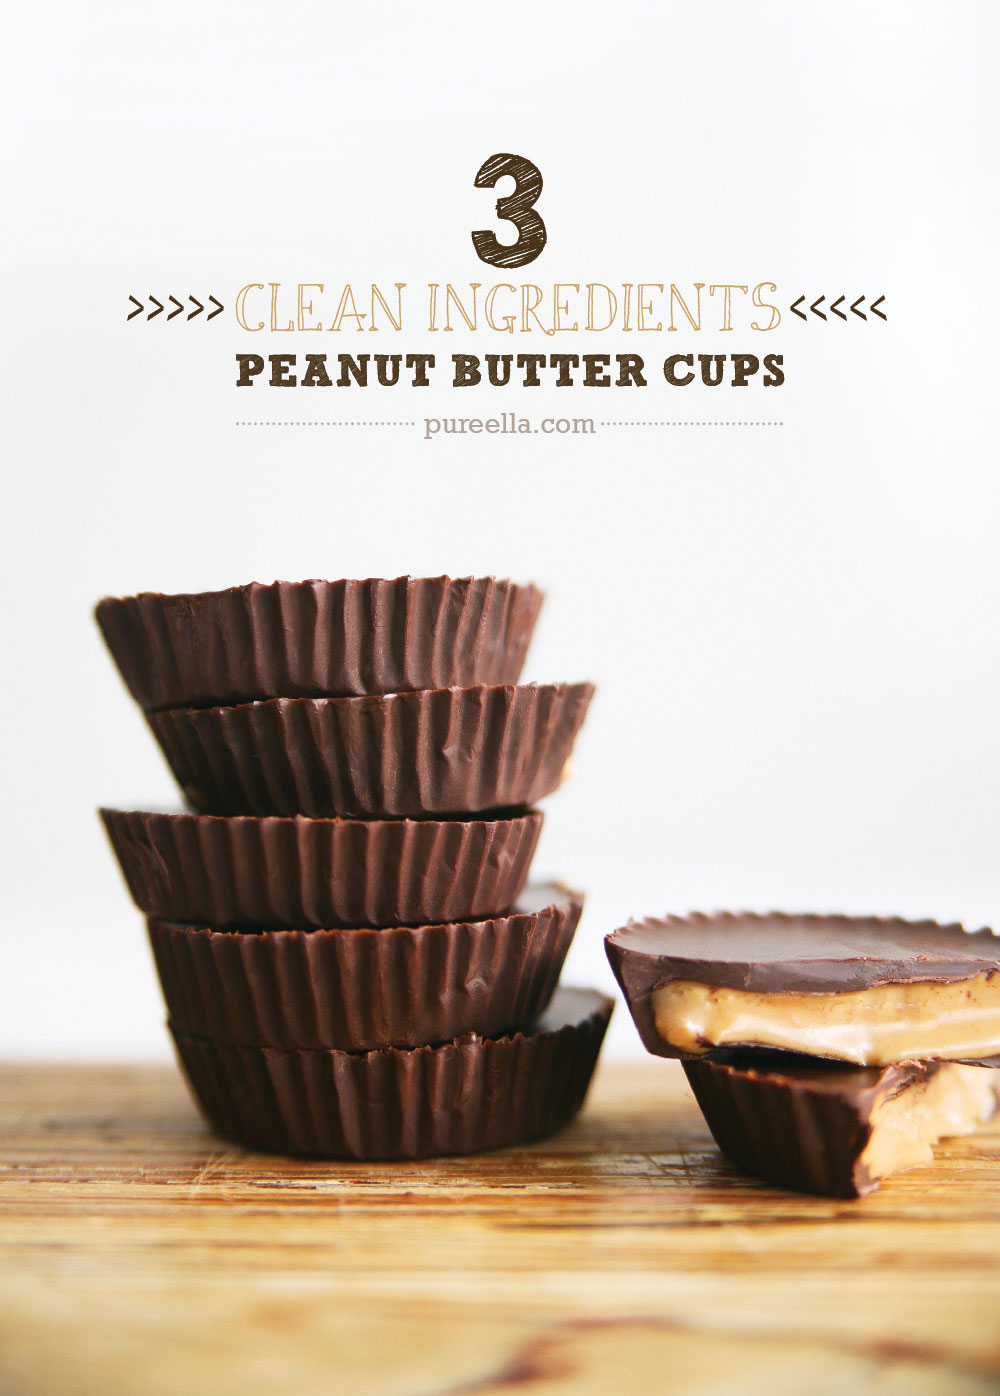 What is a good recipe with peanut butter cups as an ingredient?